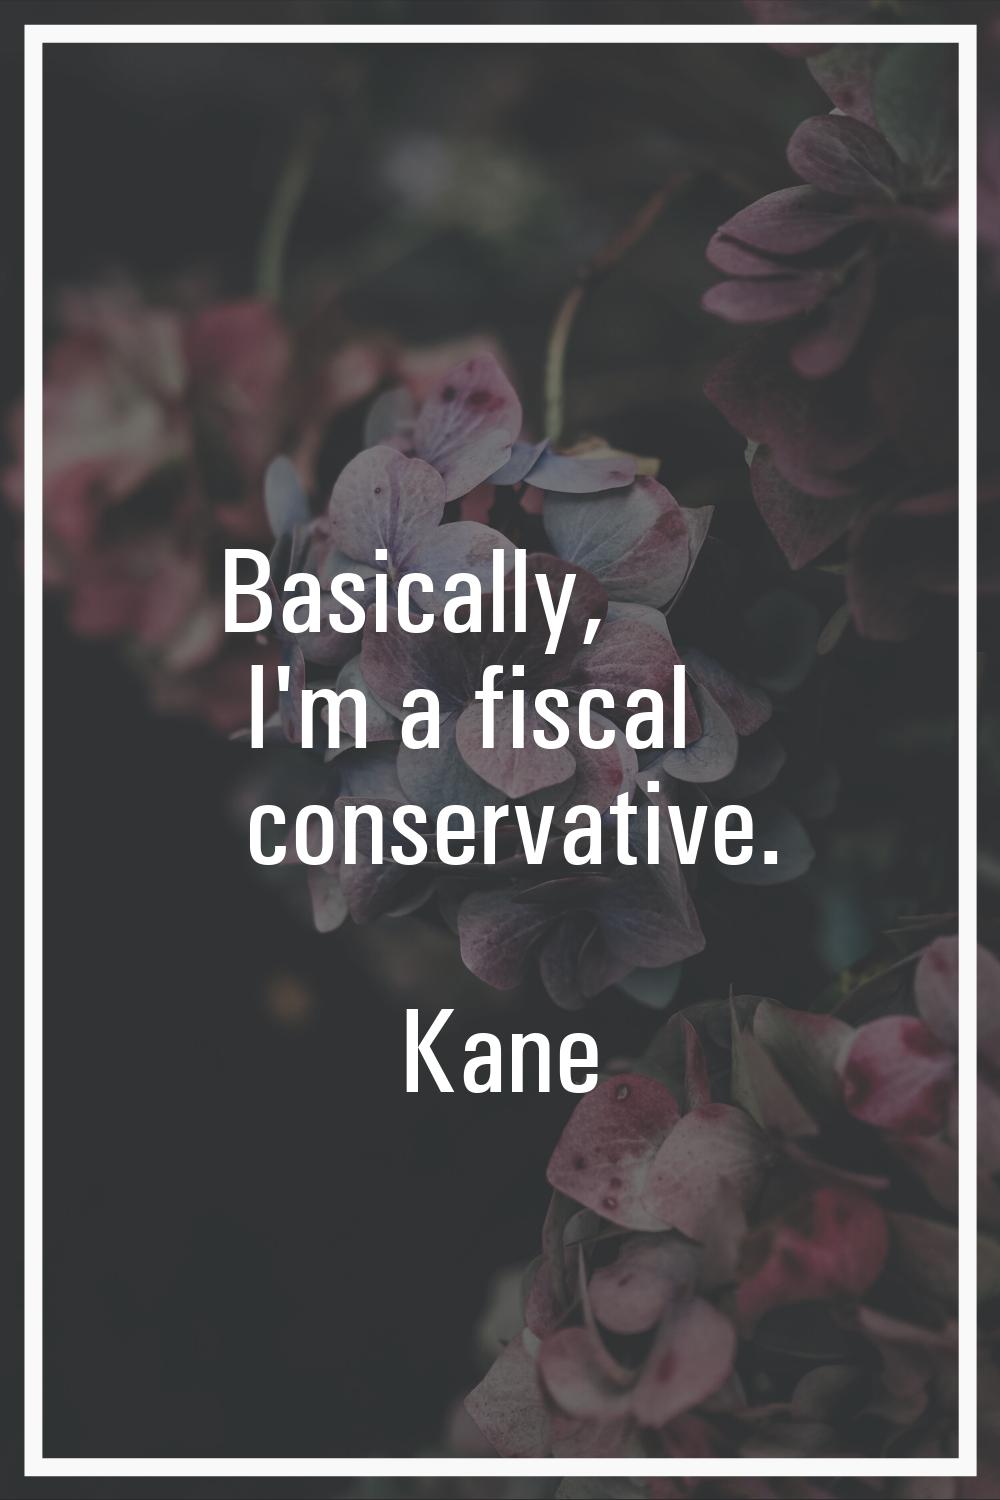 Basically, I'm a fiscal conservative.